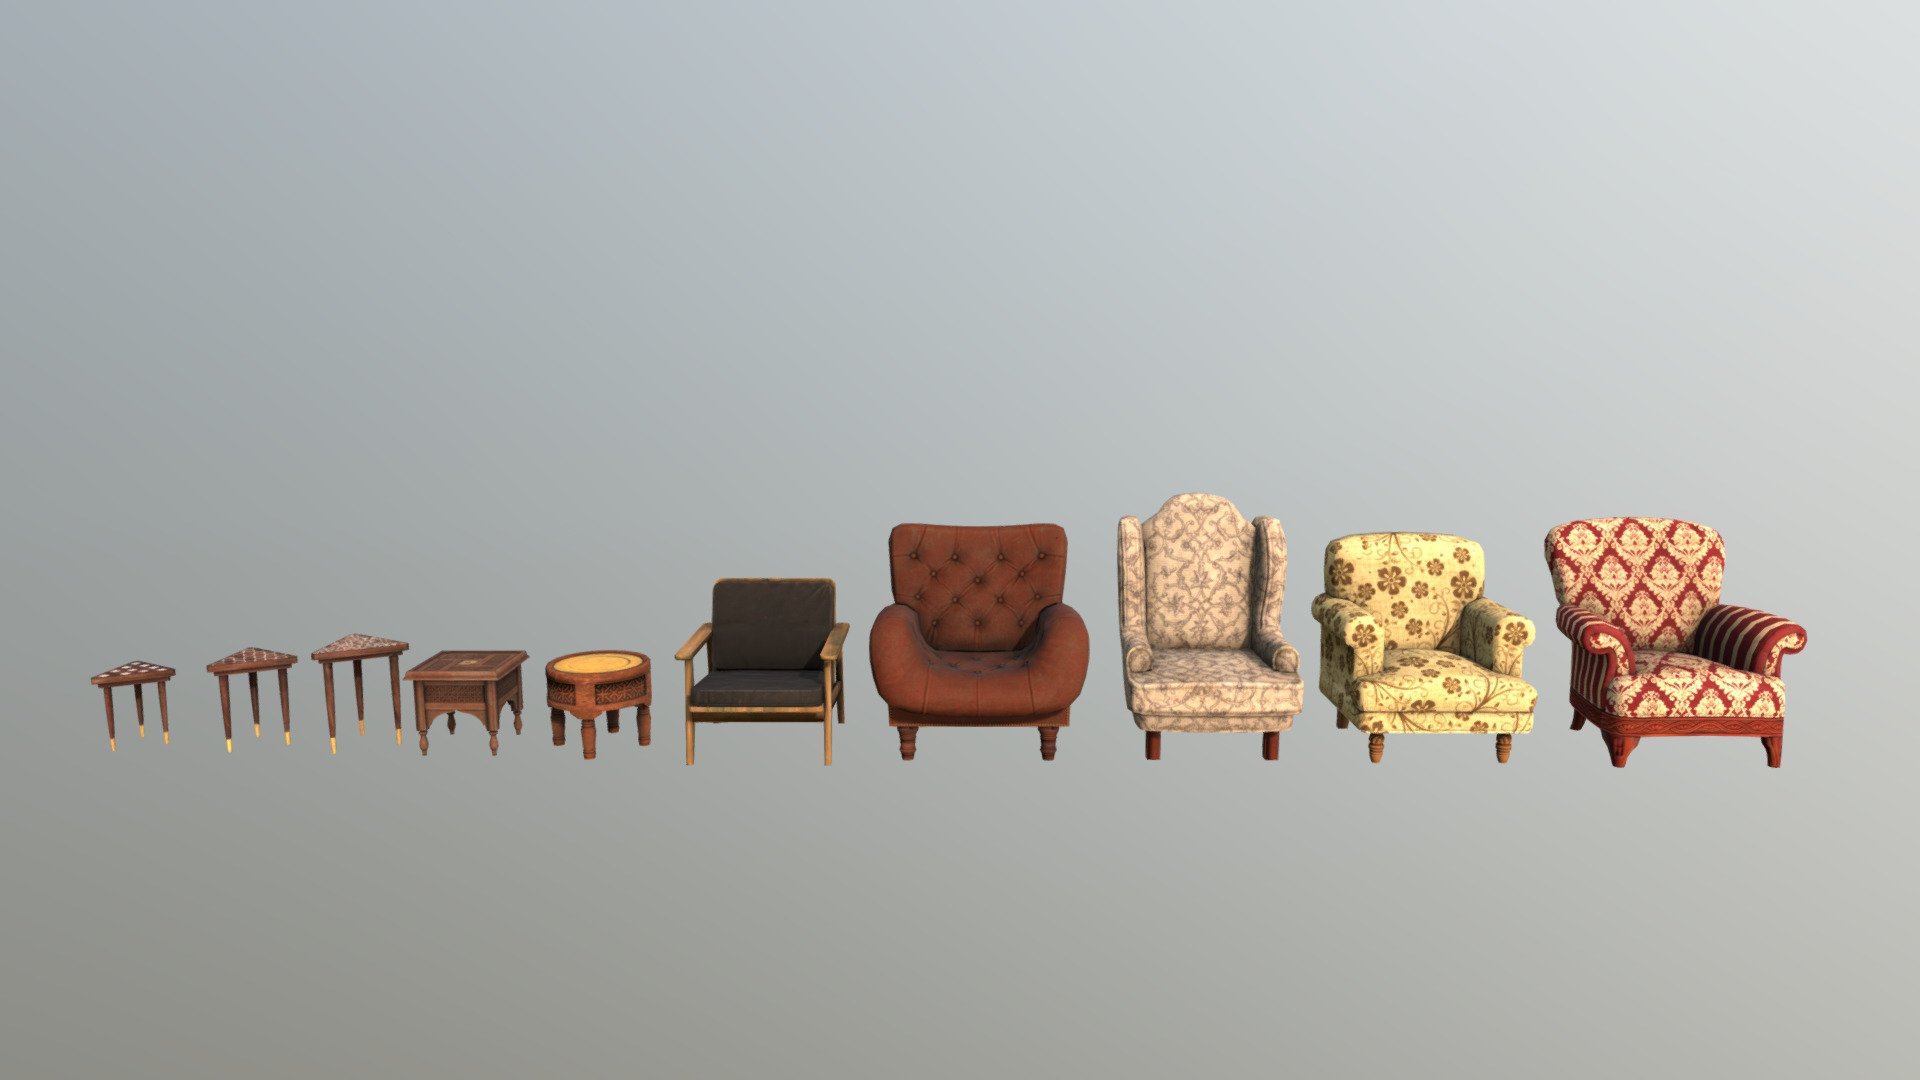 3D Chairs.



The pack has highly detailed Chairs ready for use in your project. Just drag and drop prefabs into your scene and achieve beautiful results in no time. Available formats FBX, 3DS Max 2017





We are here to empower the creators. Please contact us via the https://aaanimators.com/#contact-area if you are having issues with our assets. Our team will get back to you momentarily.





Mesh complexities:





Chair_01 632 verts; 914 tris uv 






Chair_02 803 verts; 1146 tris uv 






Chair_03 1103 verts; 1812 tris uv 





Chair_04 903 verts; 1356 tris uv 





Chair_05 1208 verts; 1420 tris uv 





Chair_06 1407 verts; 2086 tris uv 





Chair_07 603 verts; 740 tris uv 





Chair_08a 216 verts; 230 tris uv 





Chair_08b 214 verts; 230 tris uv 





Chair_08c 214 verts; 230 tris uv 





Includes 2 sets of textures with 4 materials:

● Gloss

● Diffuse

● Normal

● Specular

 - Chairs - Buy Royalty Free 3D model by aaanimators 3d model